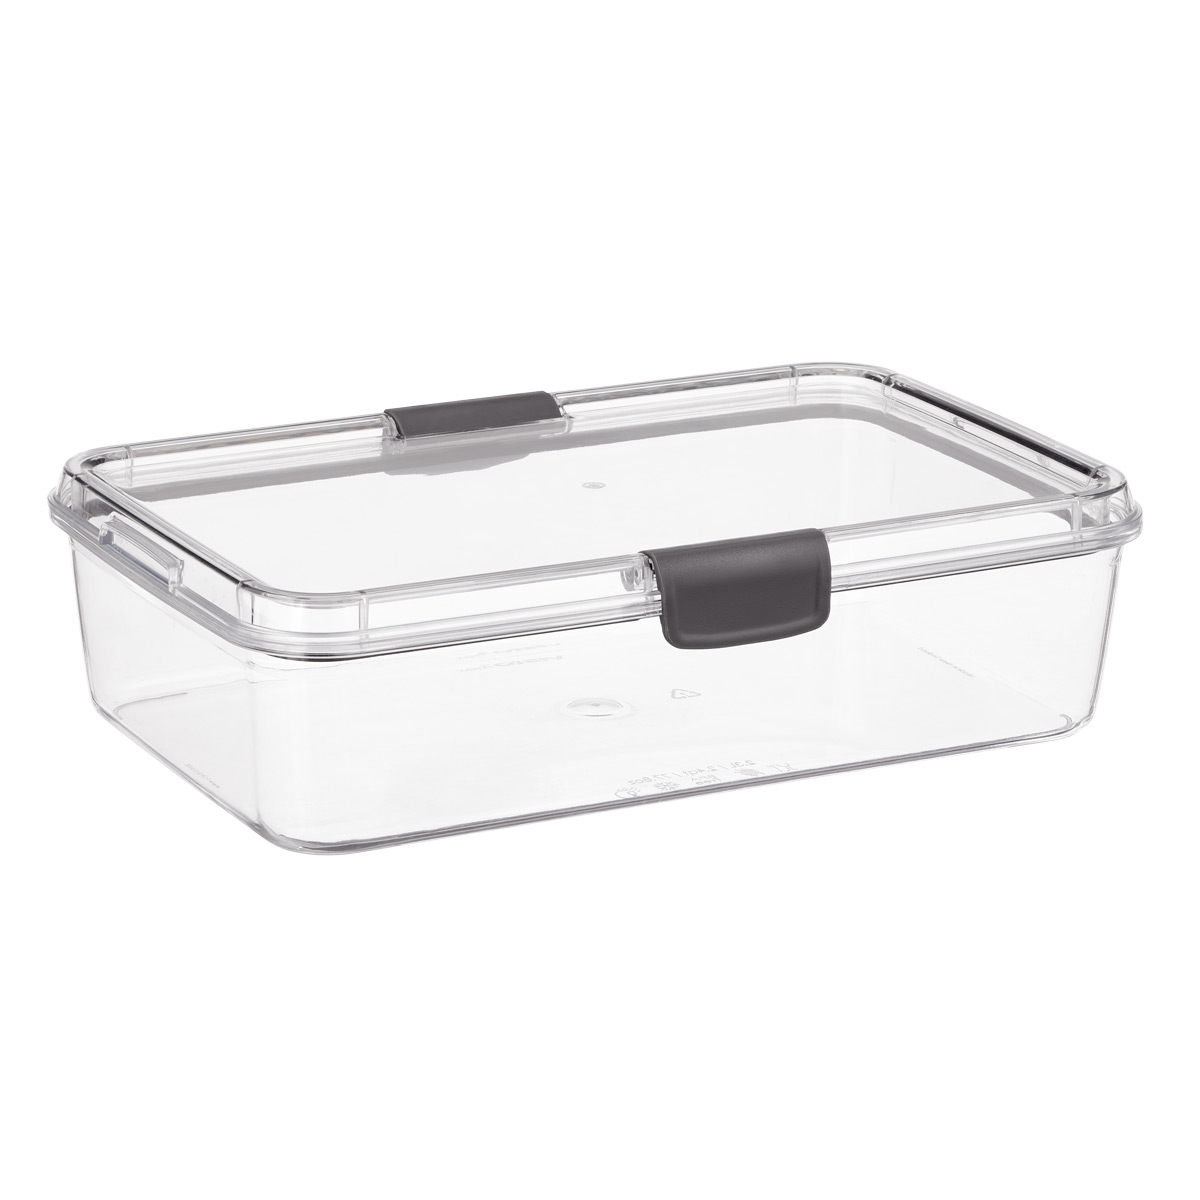 https://www.containerstore.com/catalogimages/438053/10083918_Titan_Food_Storage_Set_Of_8.jpg